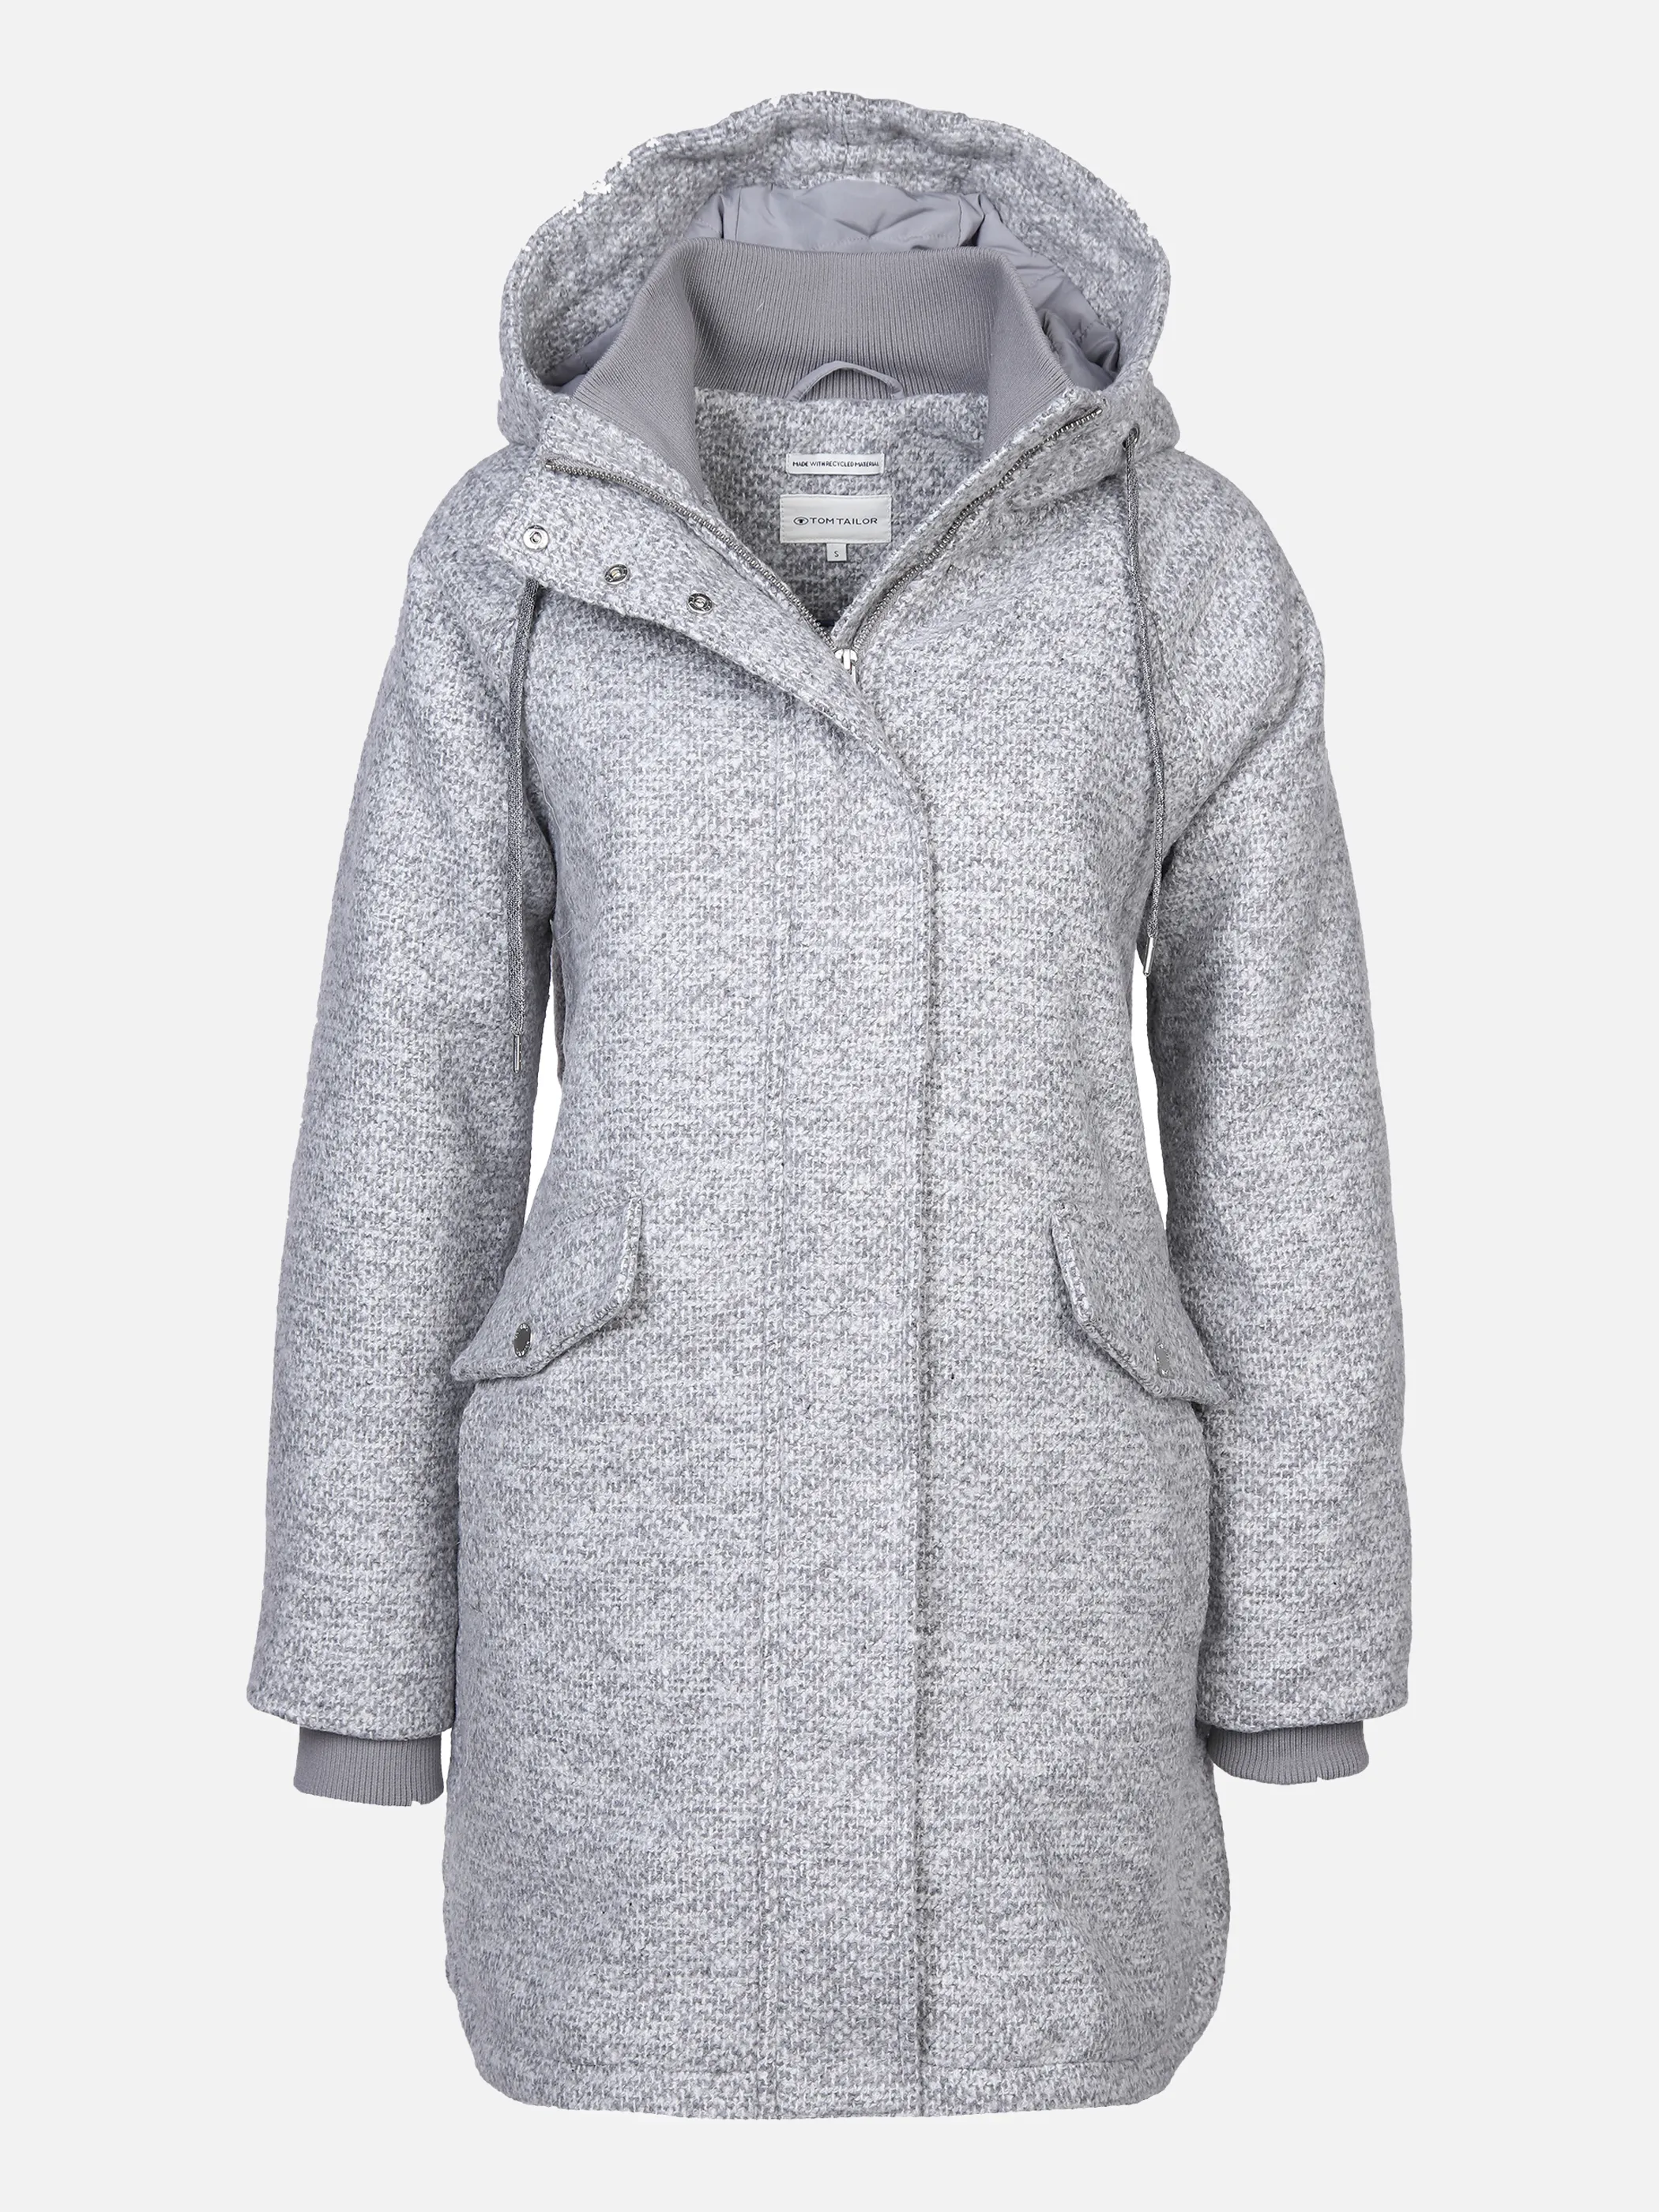 Tom Tailor 1032472 structured hooded coat Grau 869467 30285 1